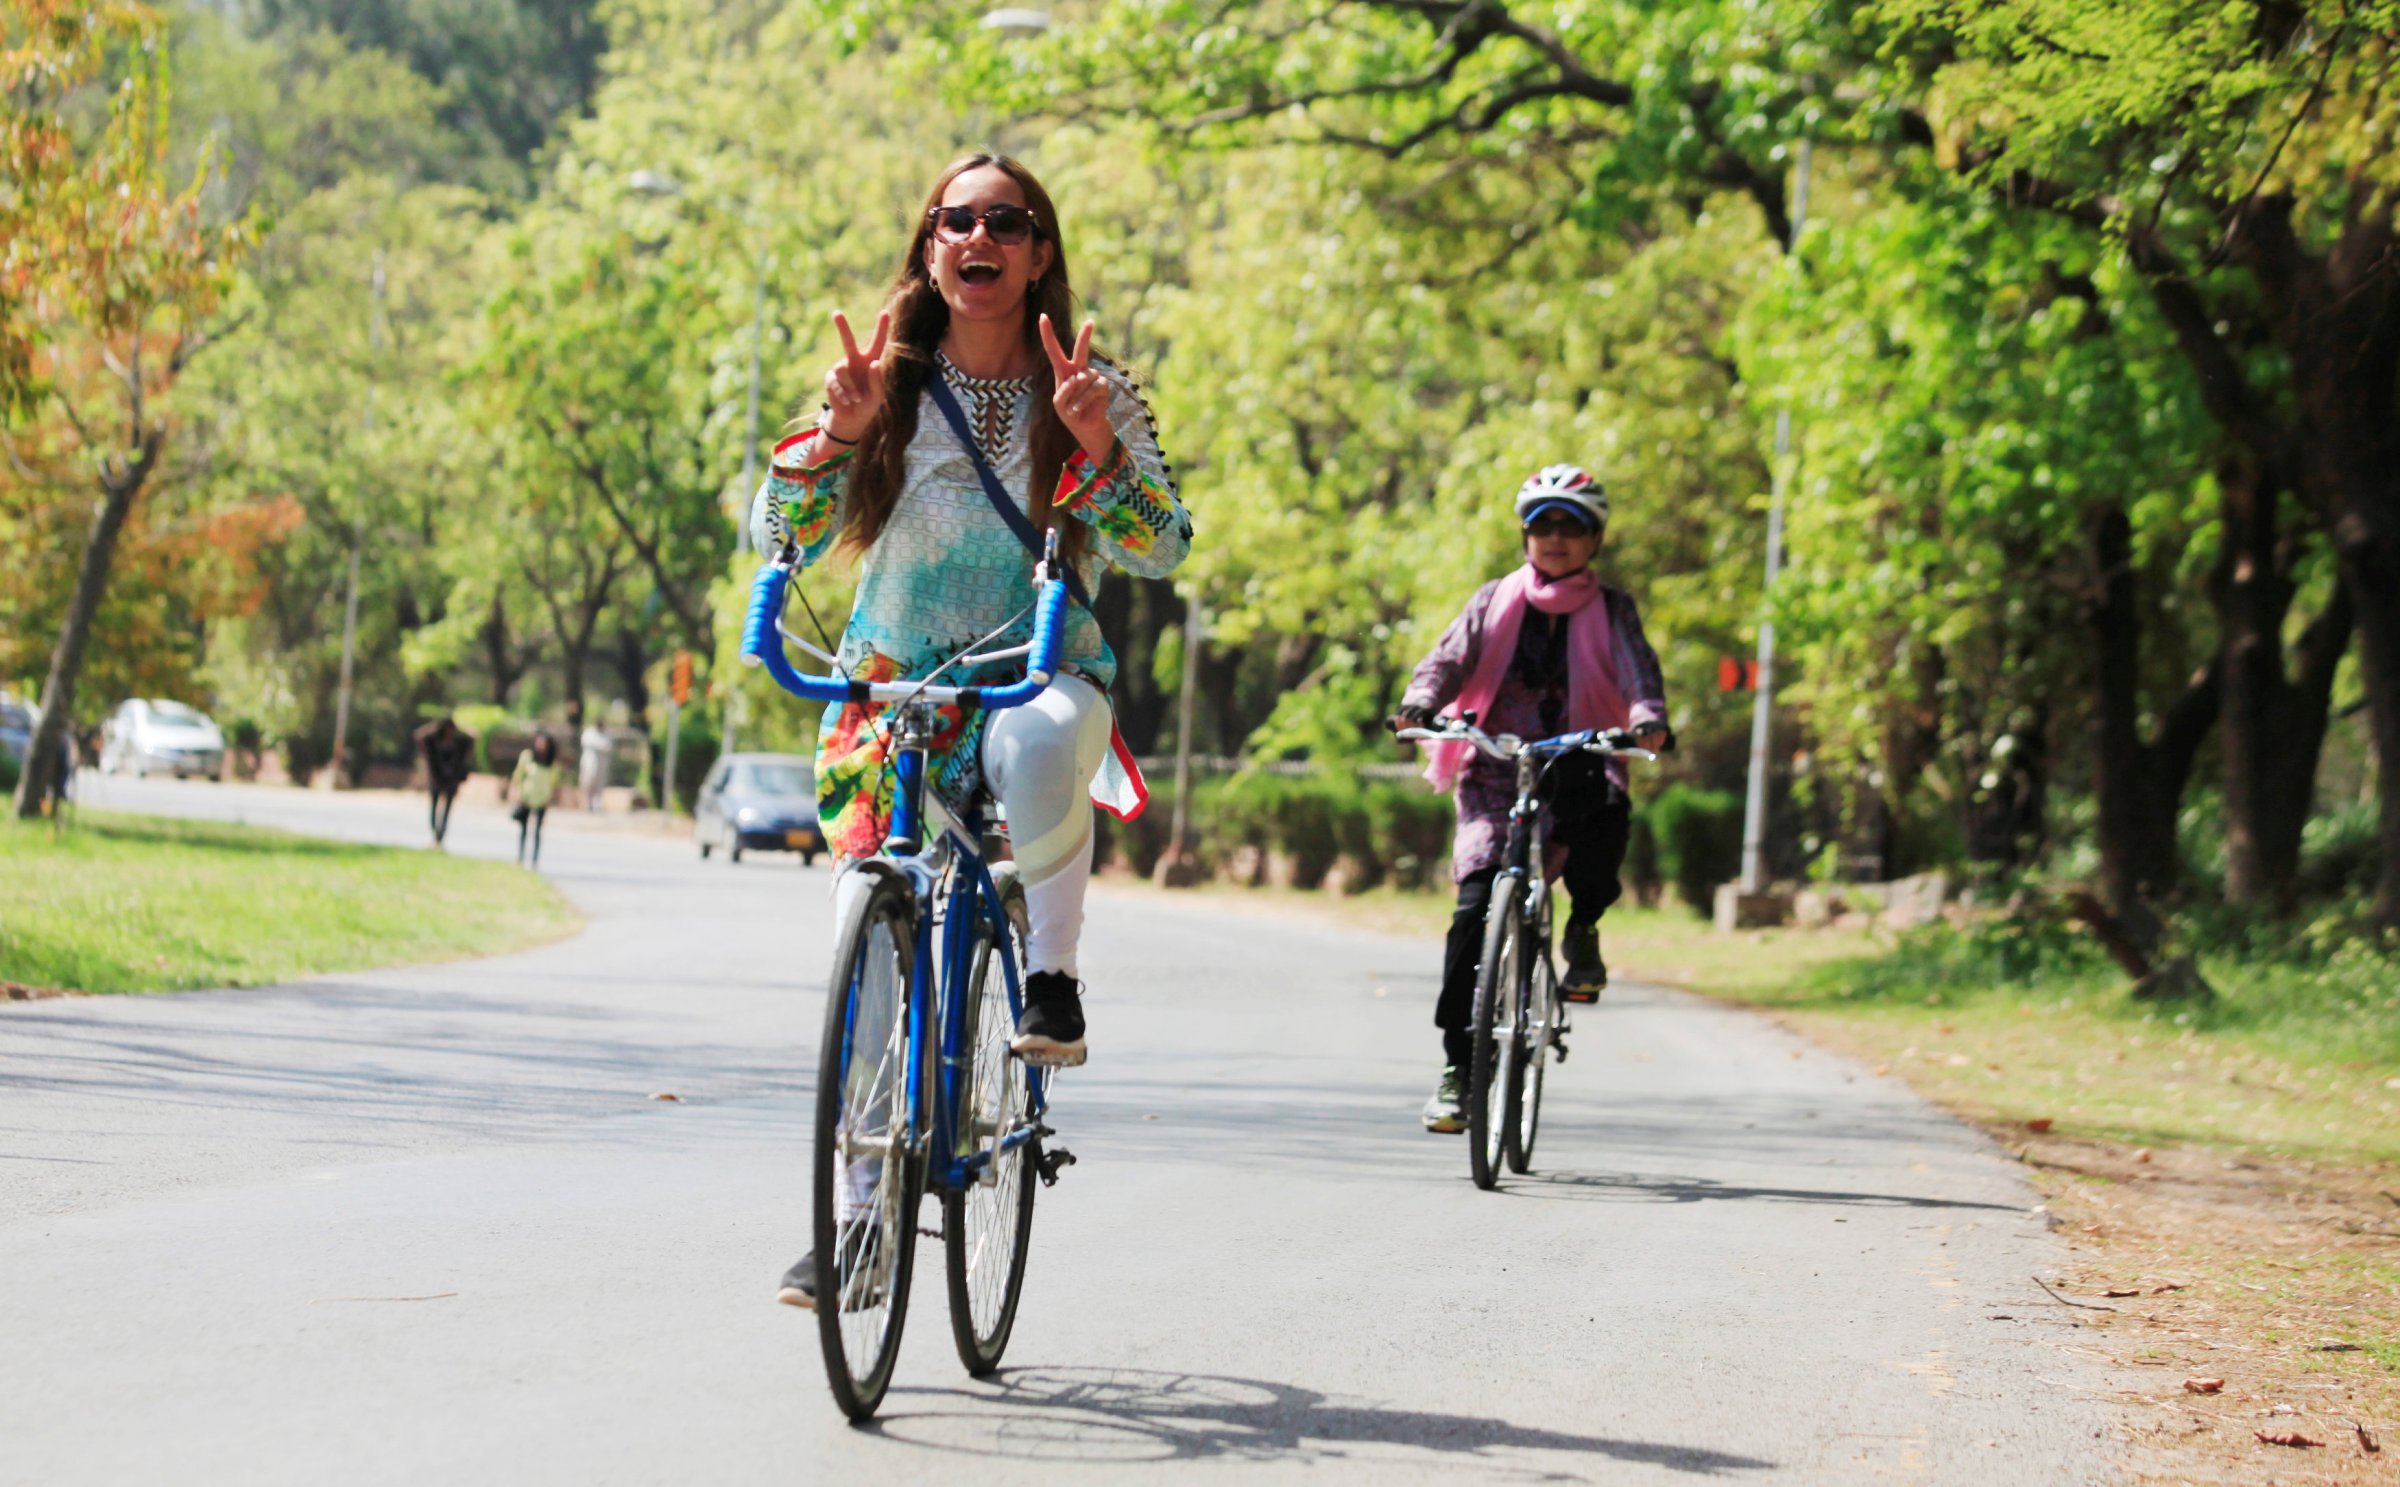 Women are riding bikes in public to challenge gender norms in ...